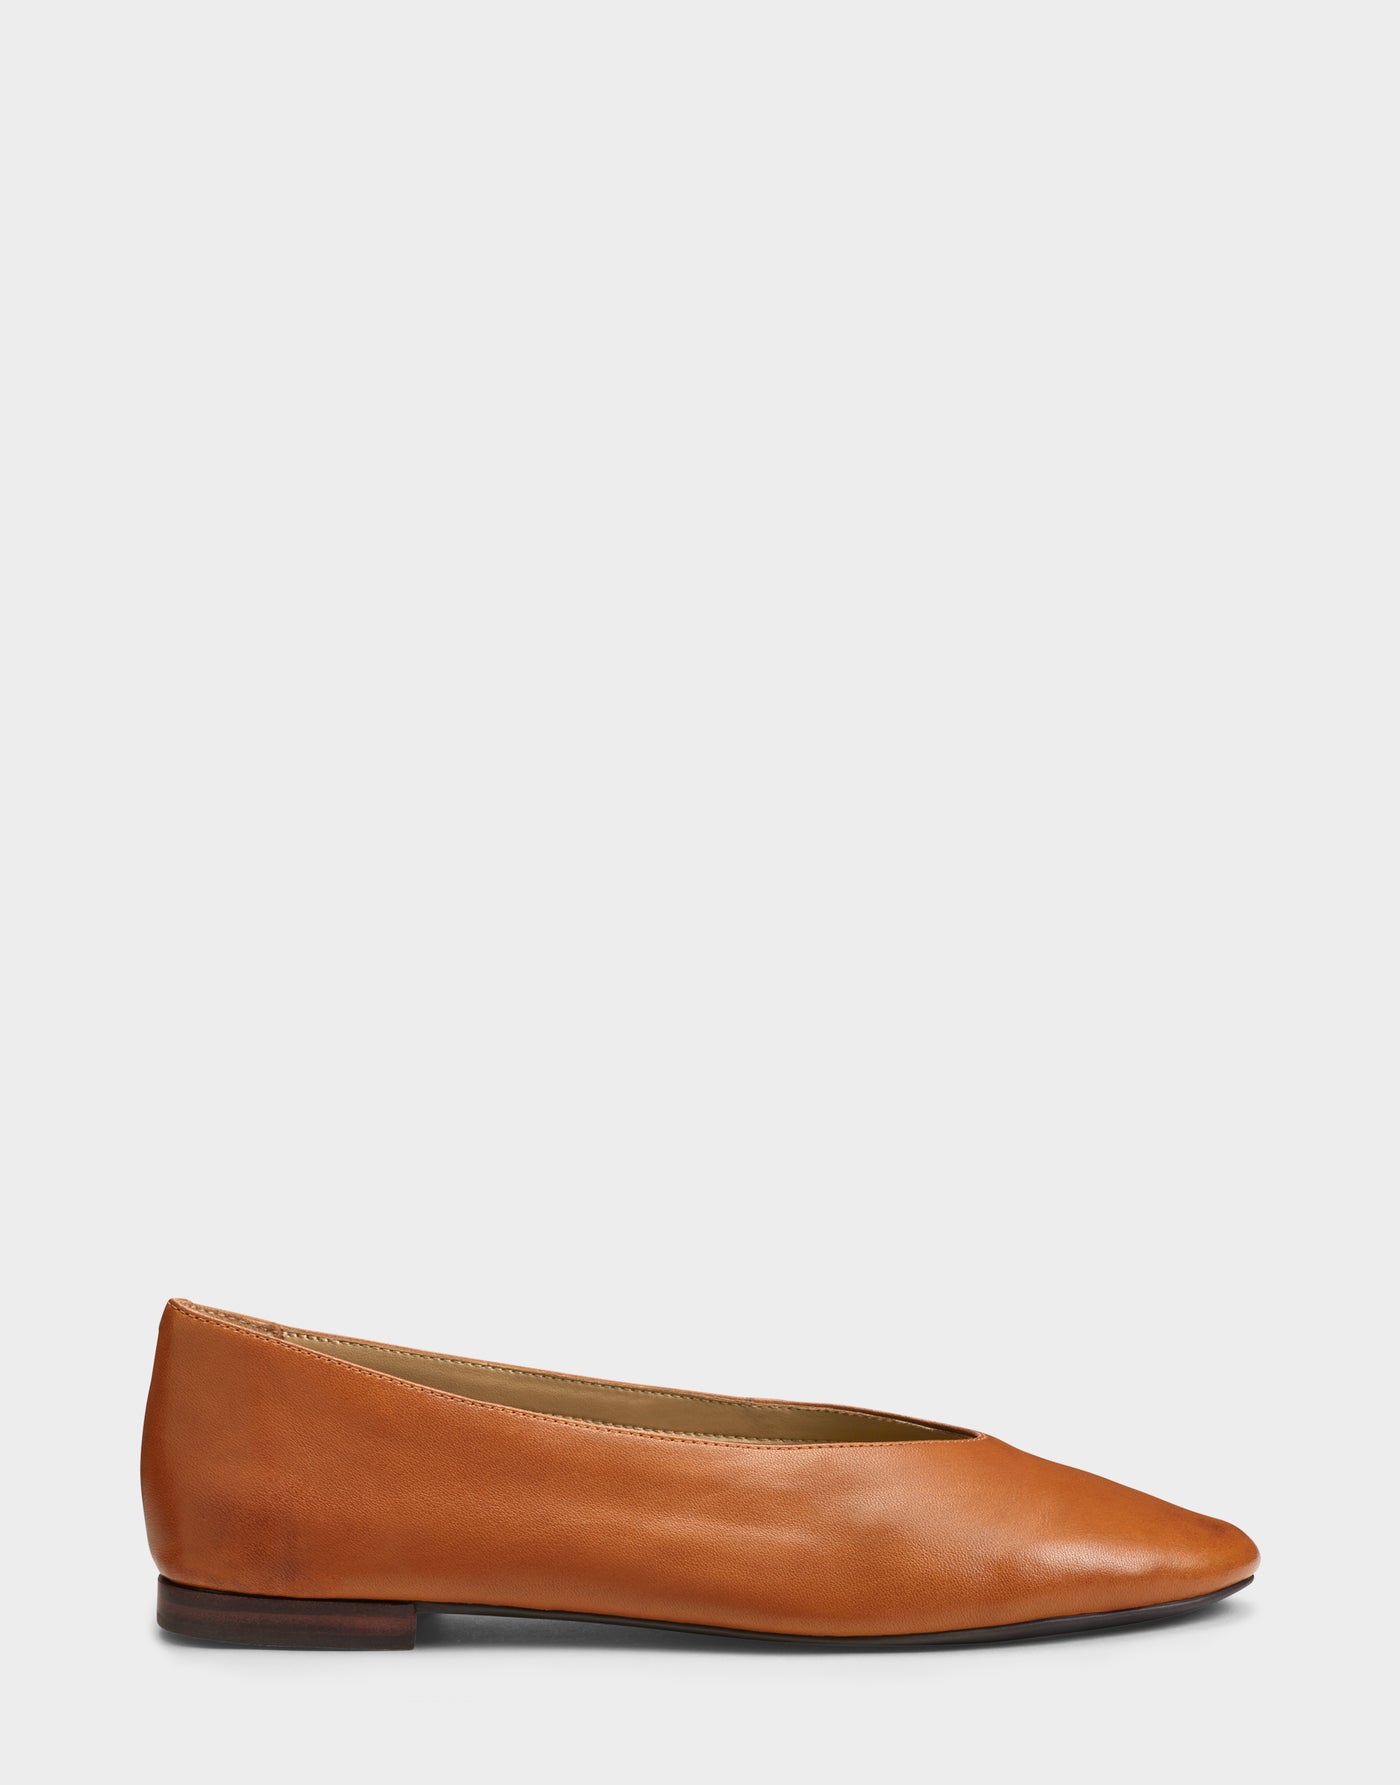 Removable Footbed – Aerosoles